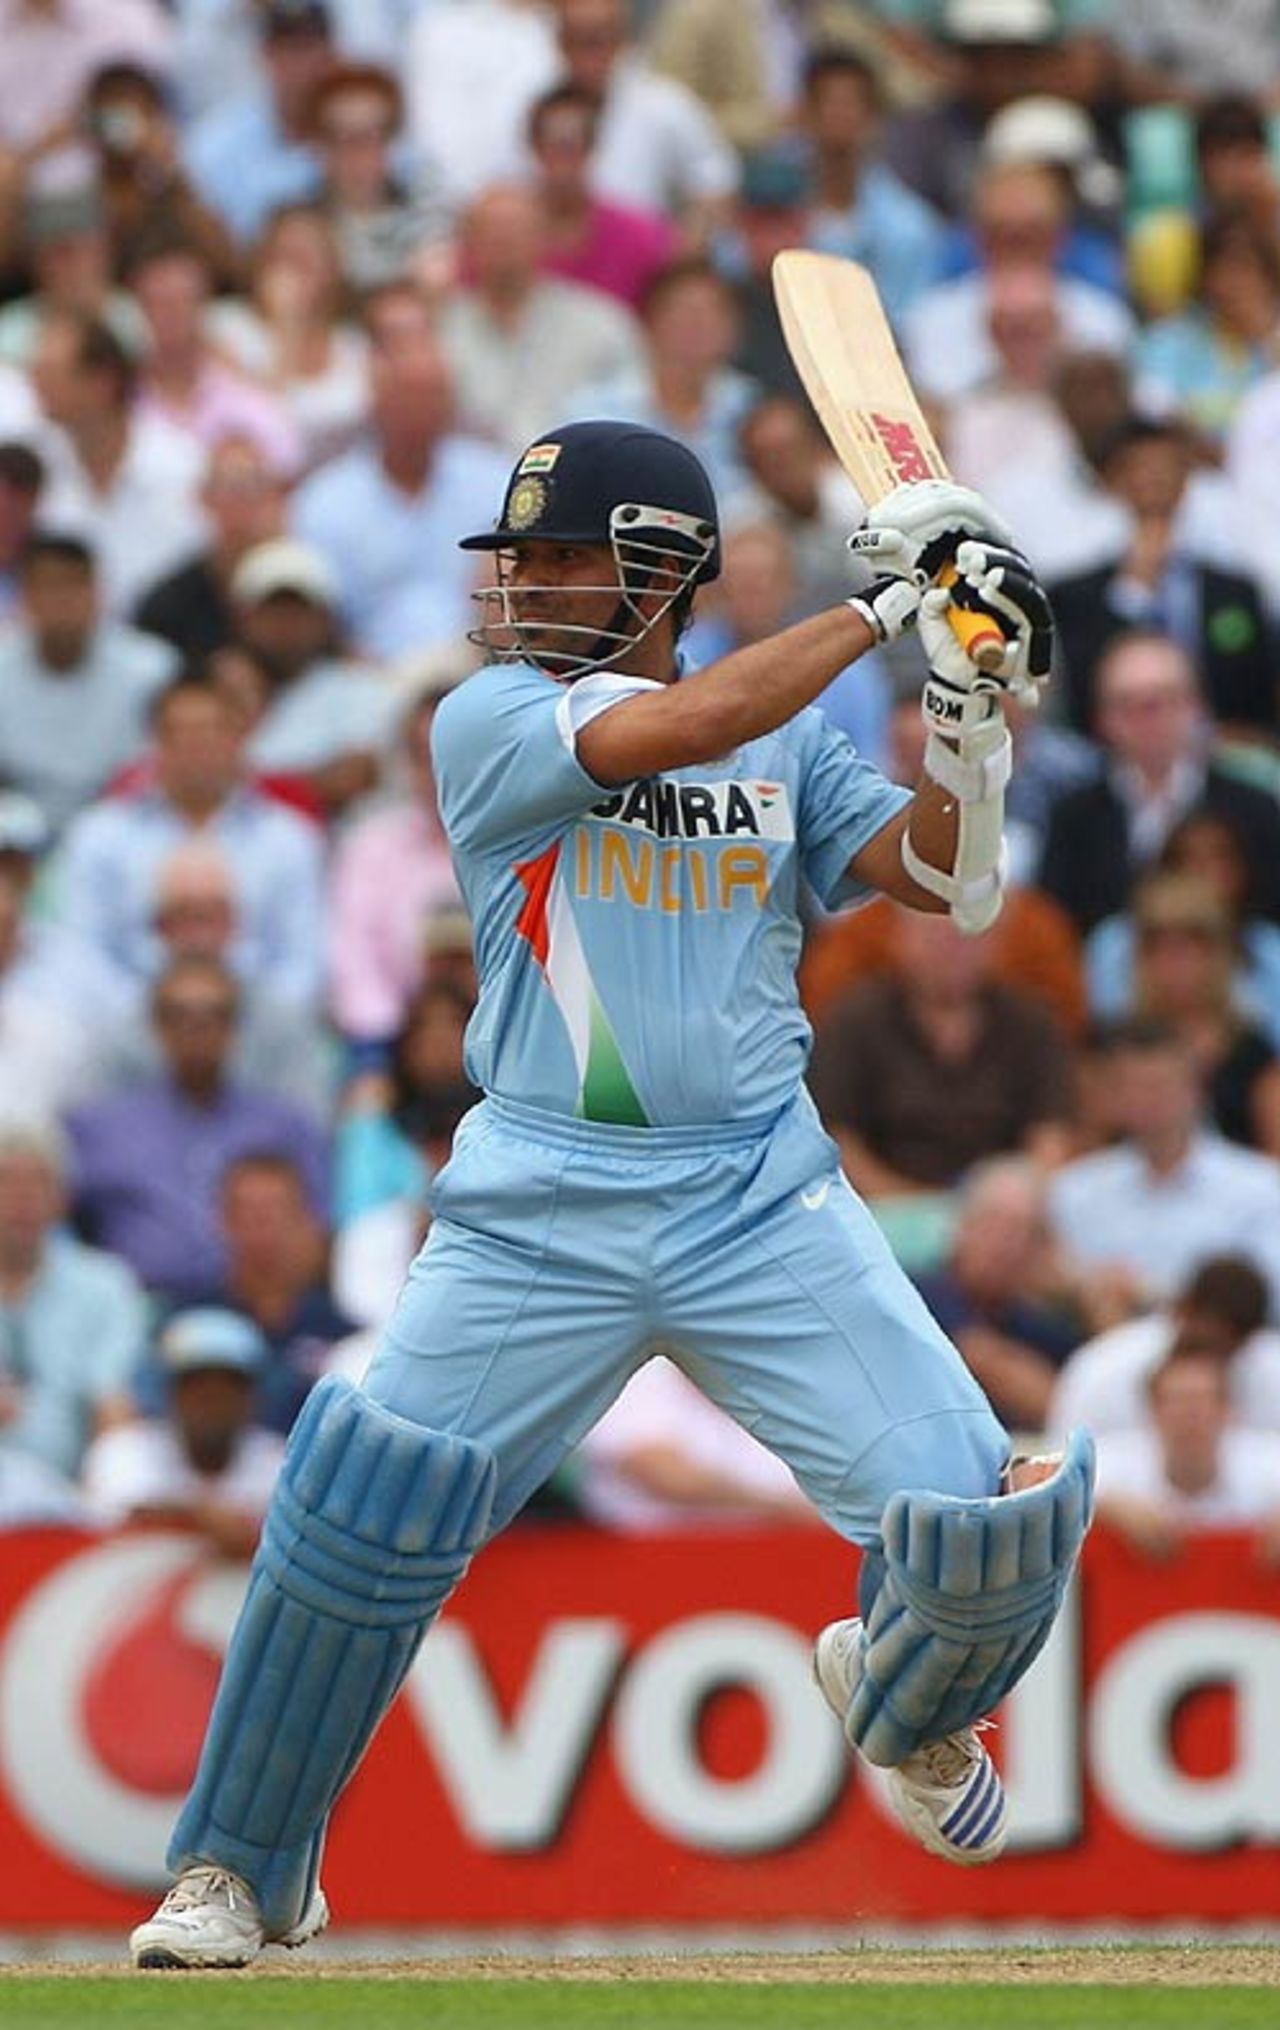 Sachin Tendulkar rocks on the backfoot and cuts square of the wicket, England v India, 6th ODI, The Oval, September 5, 2007